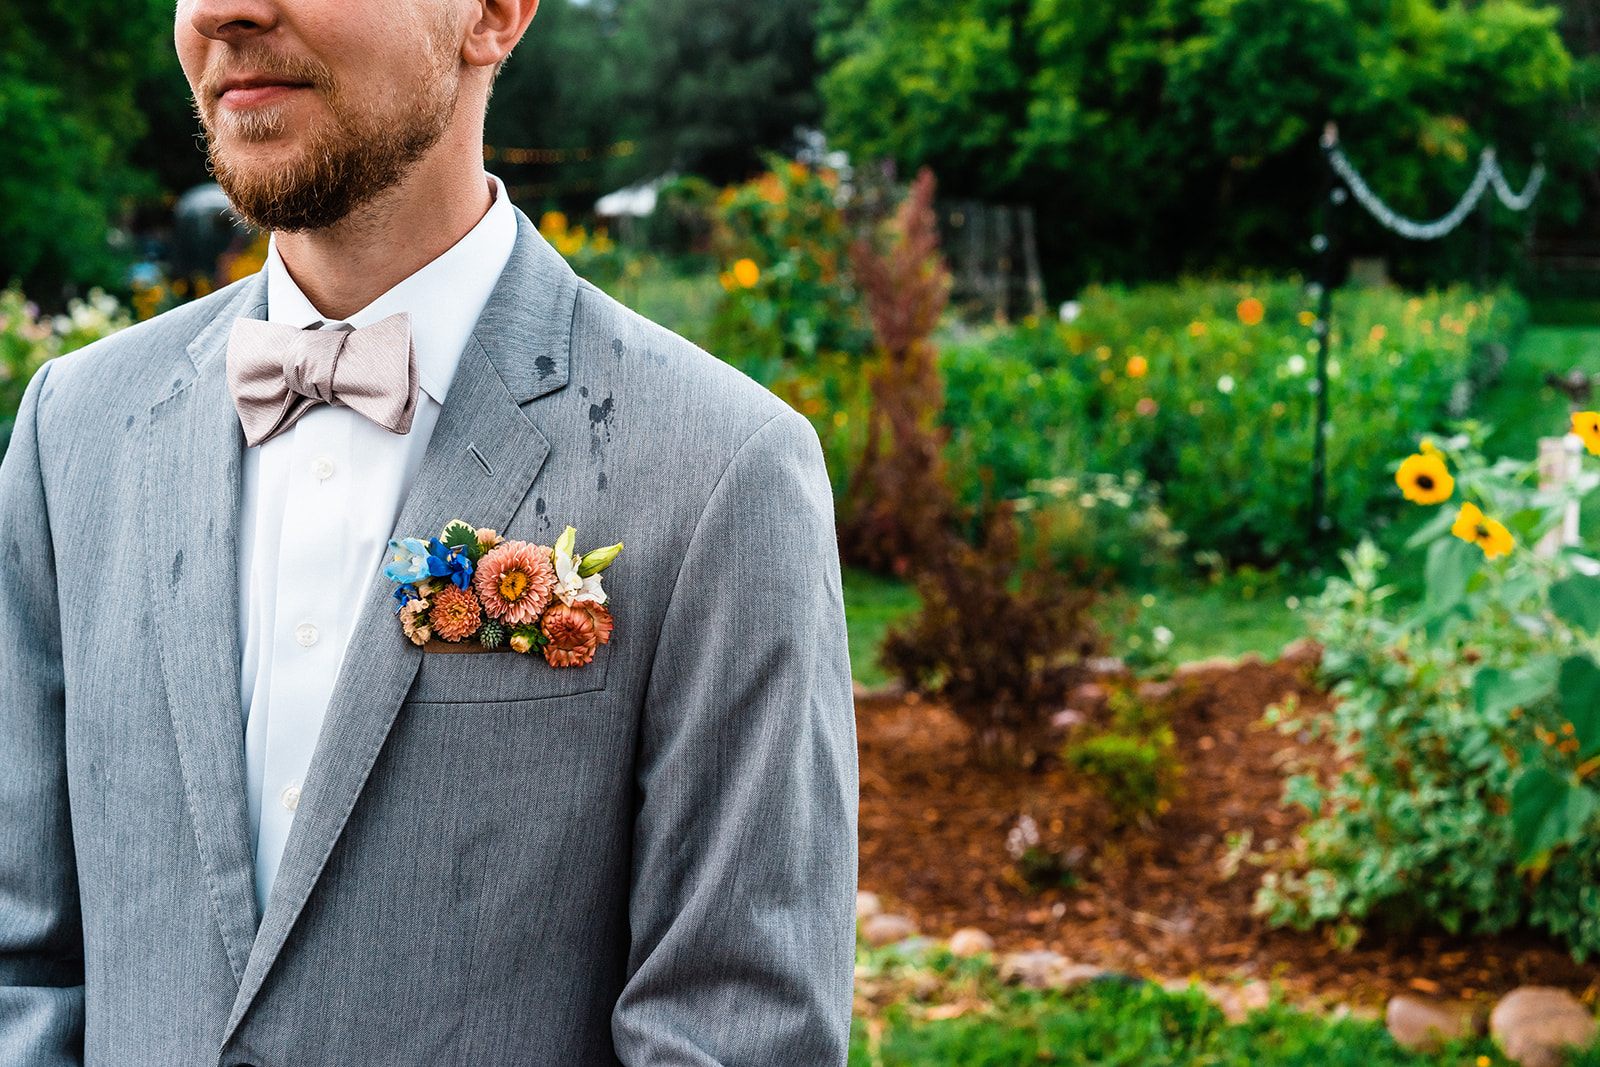 A groom in a gray suit standing in a garden.